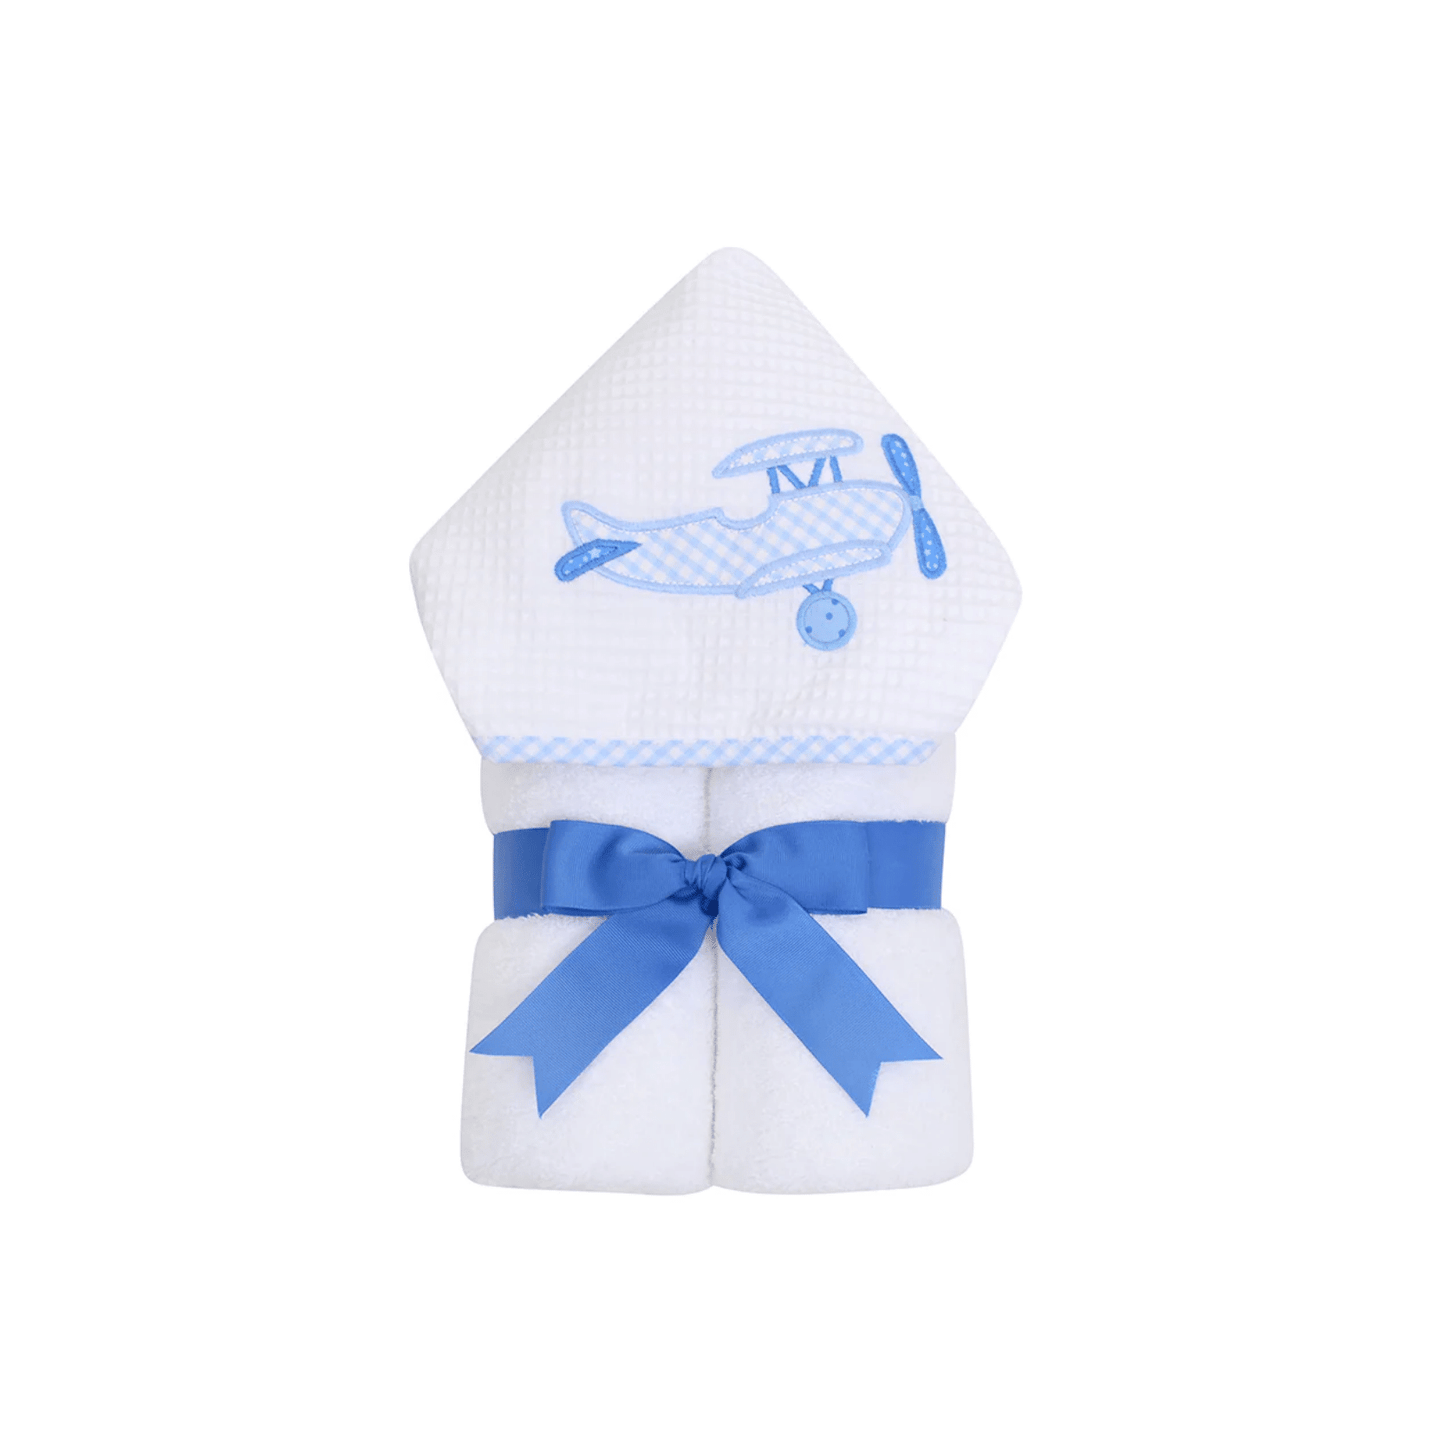 Personalized Baby Boy Blue Plane Hooded Towel - Give Wink